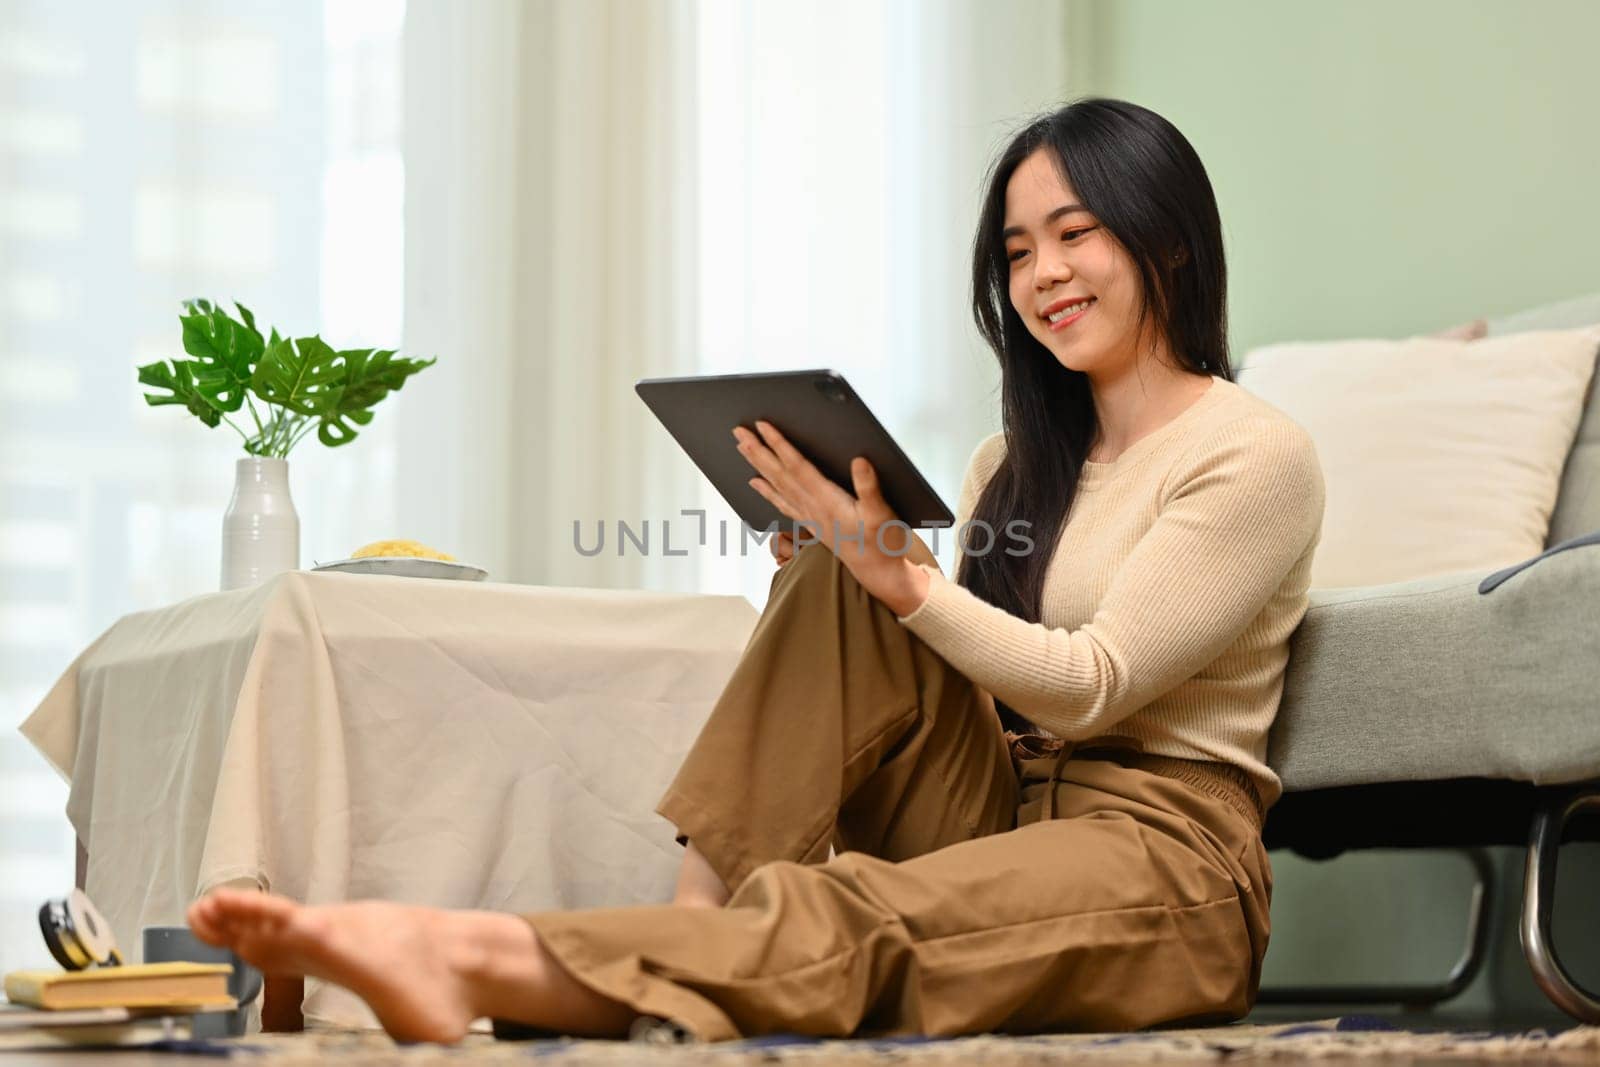 Charming young woman using digital tablet while sitting on floor in living room. Technology and lifestyle concept.